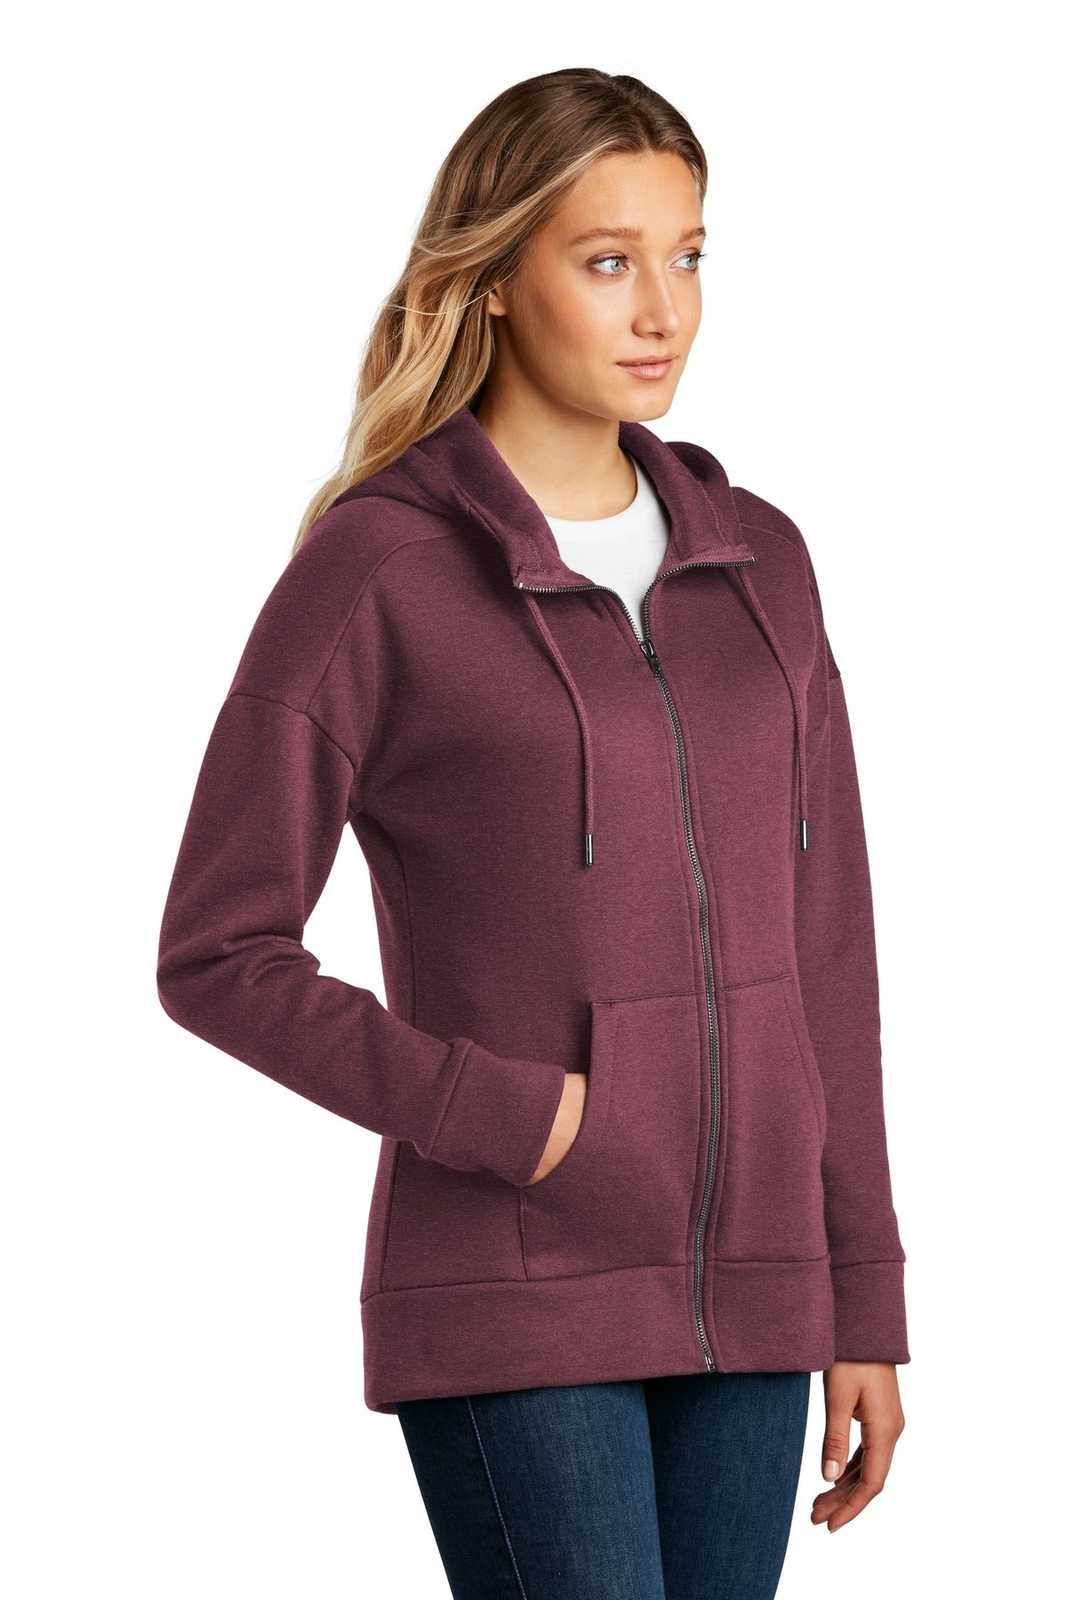 District DT1104 Womens Perfect Weight Fleece Drop Shoulder Full-Zip Hoodie - Heathered Loganberry - HIT a Double - 4